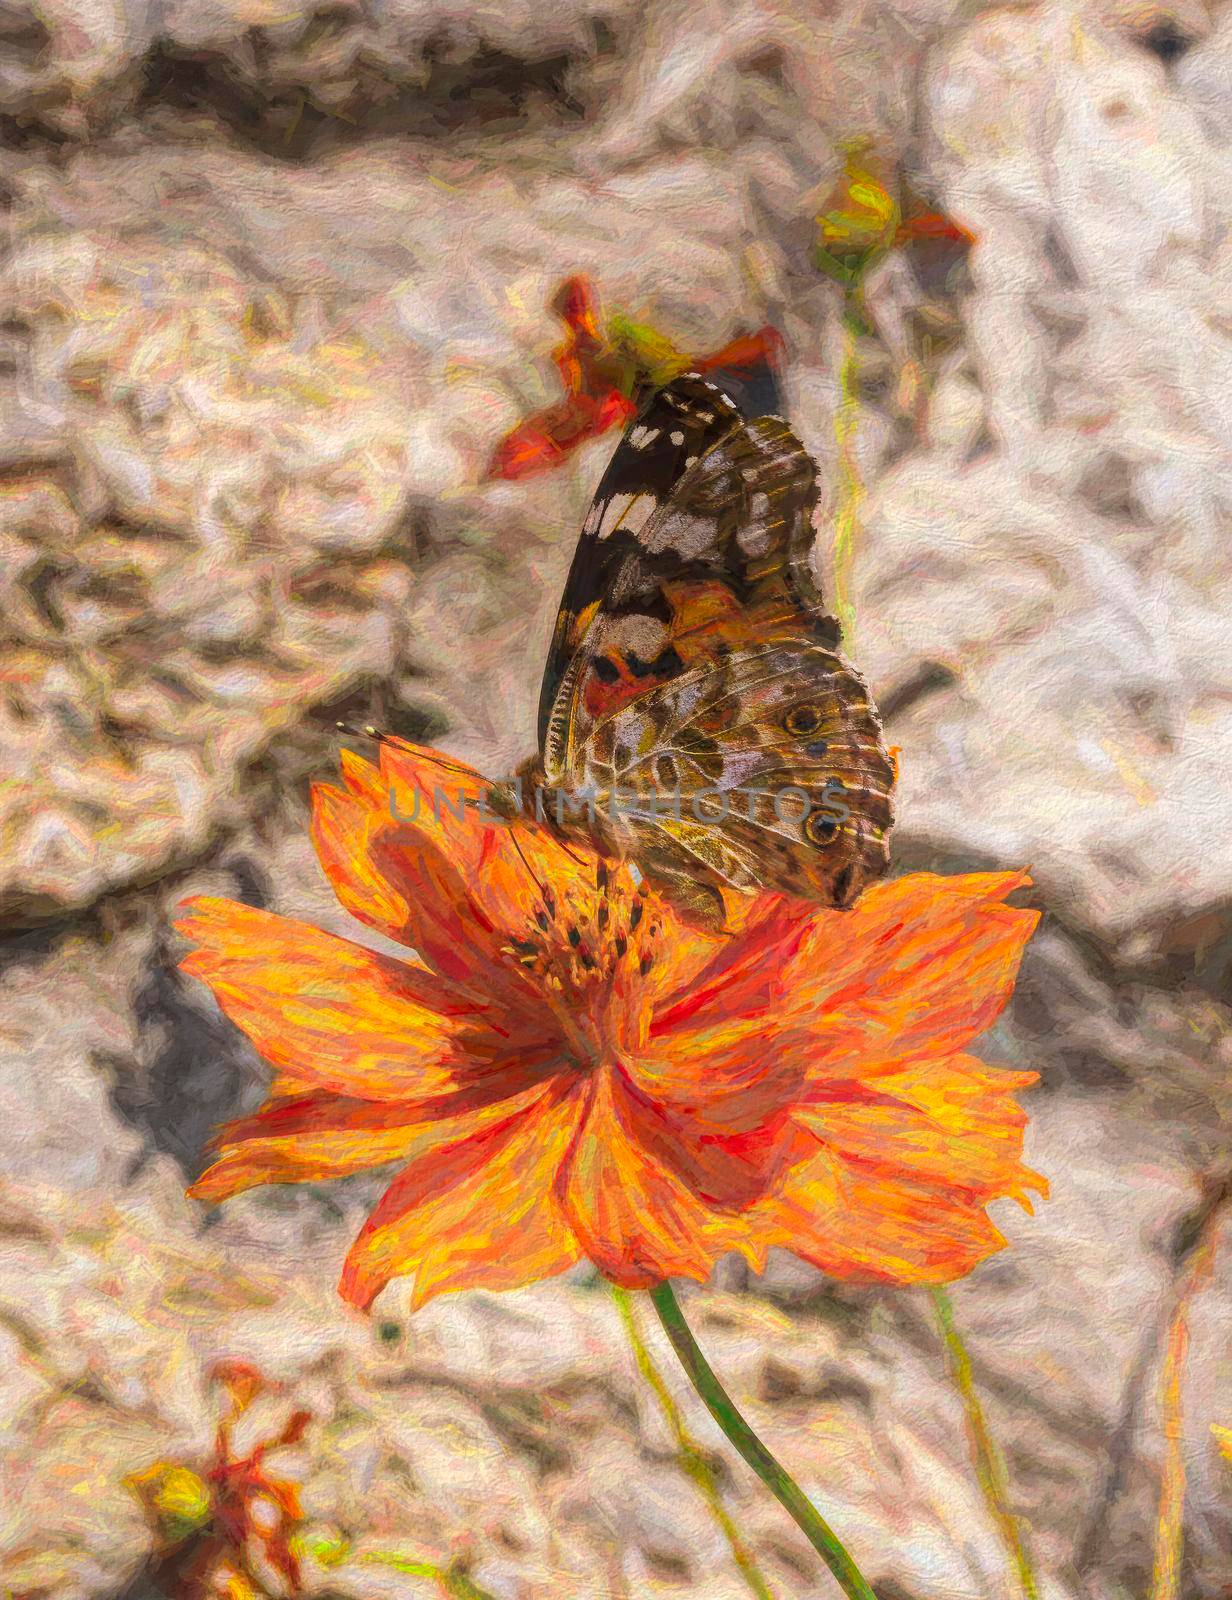 A Butterfly Nectaring On An Orange Flower - digital painting